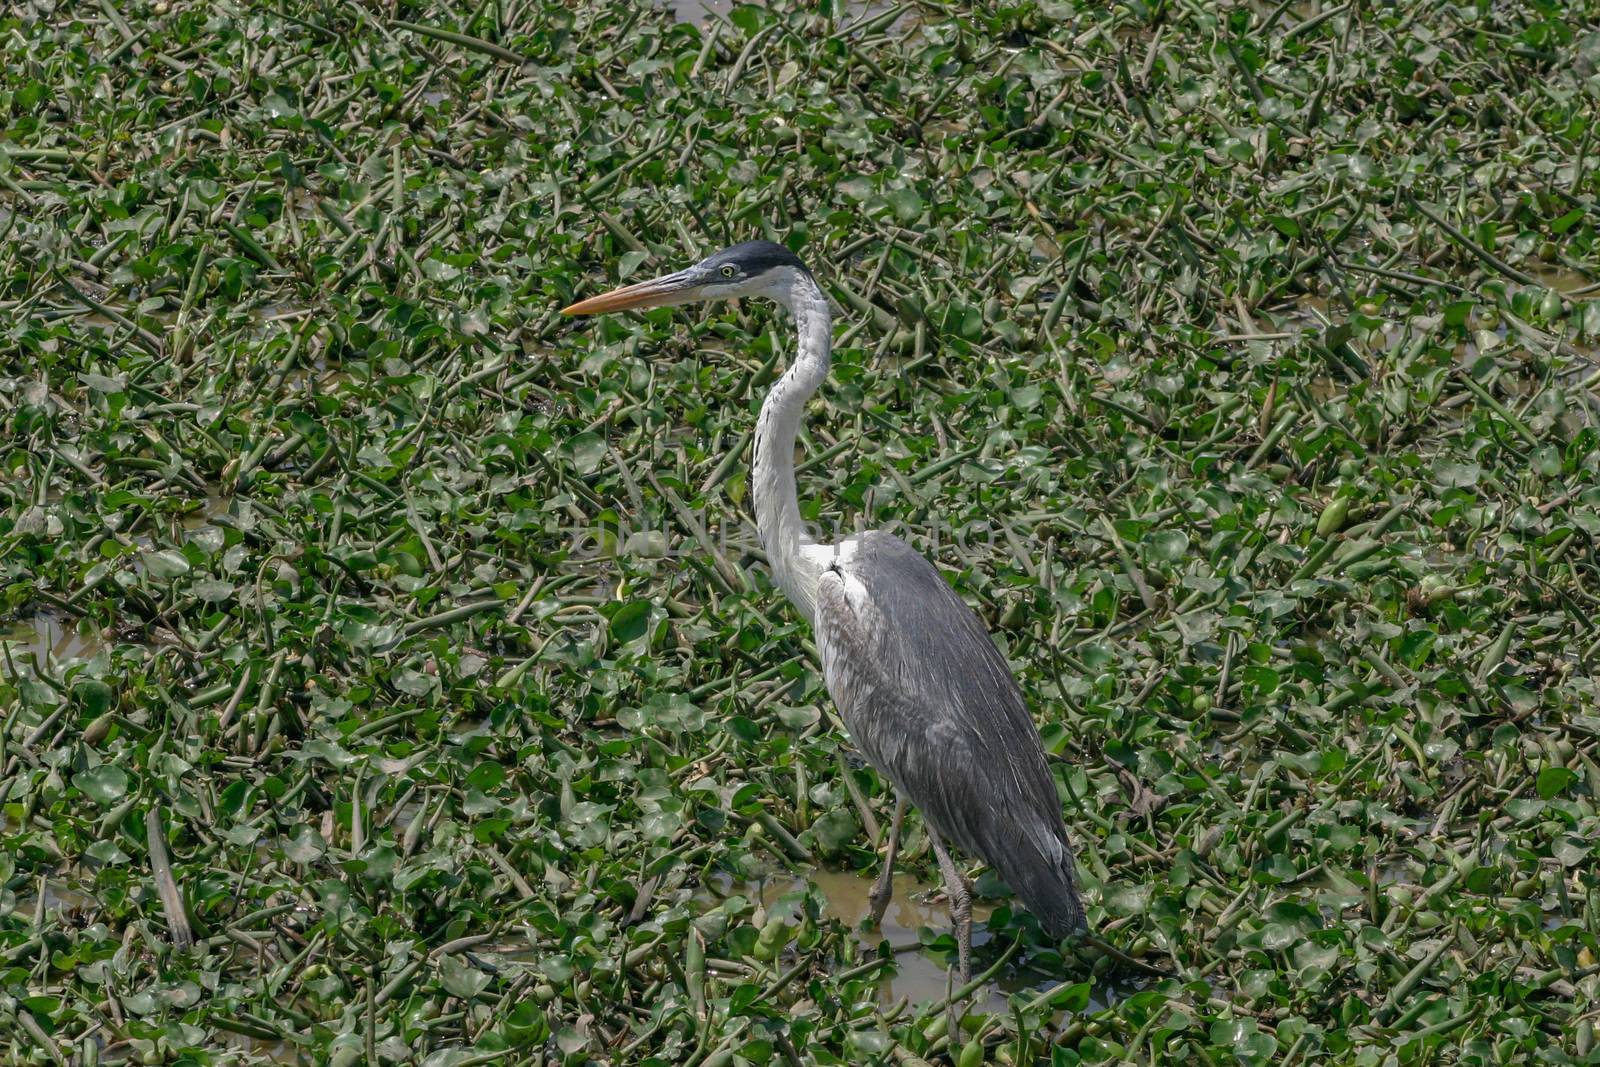 A Cocoi Heron wading through the swamps of the Pantanal Wetlands in Brazil